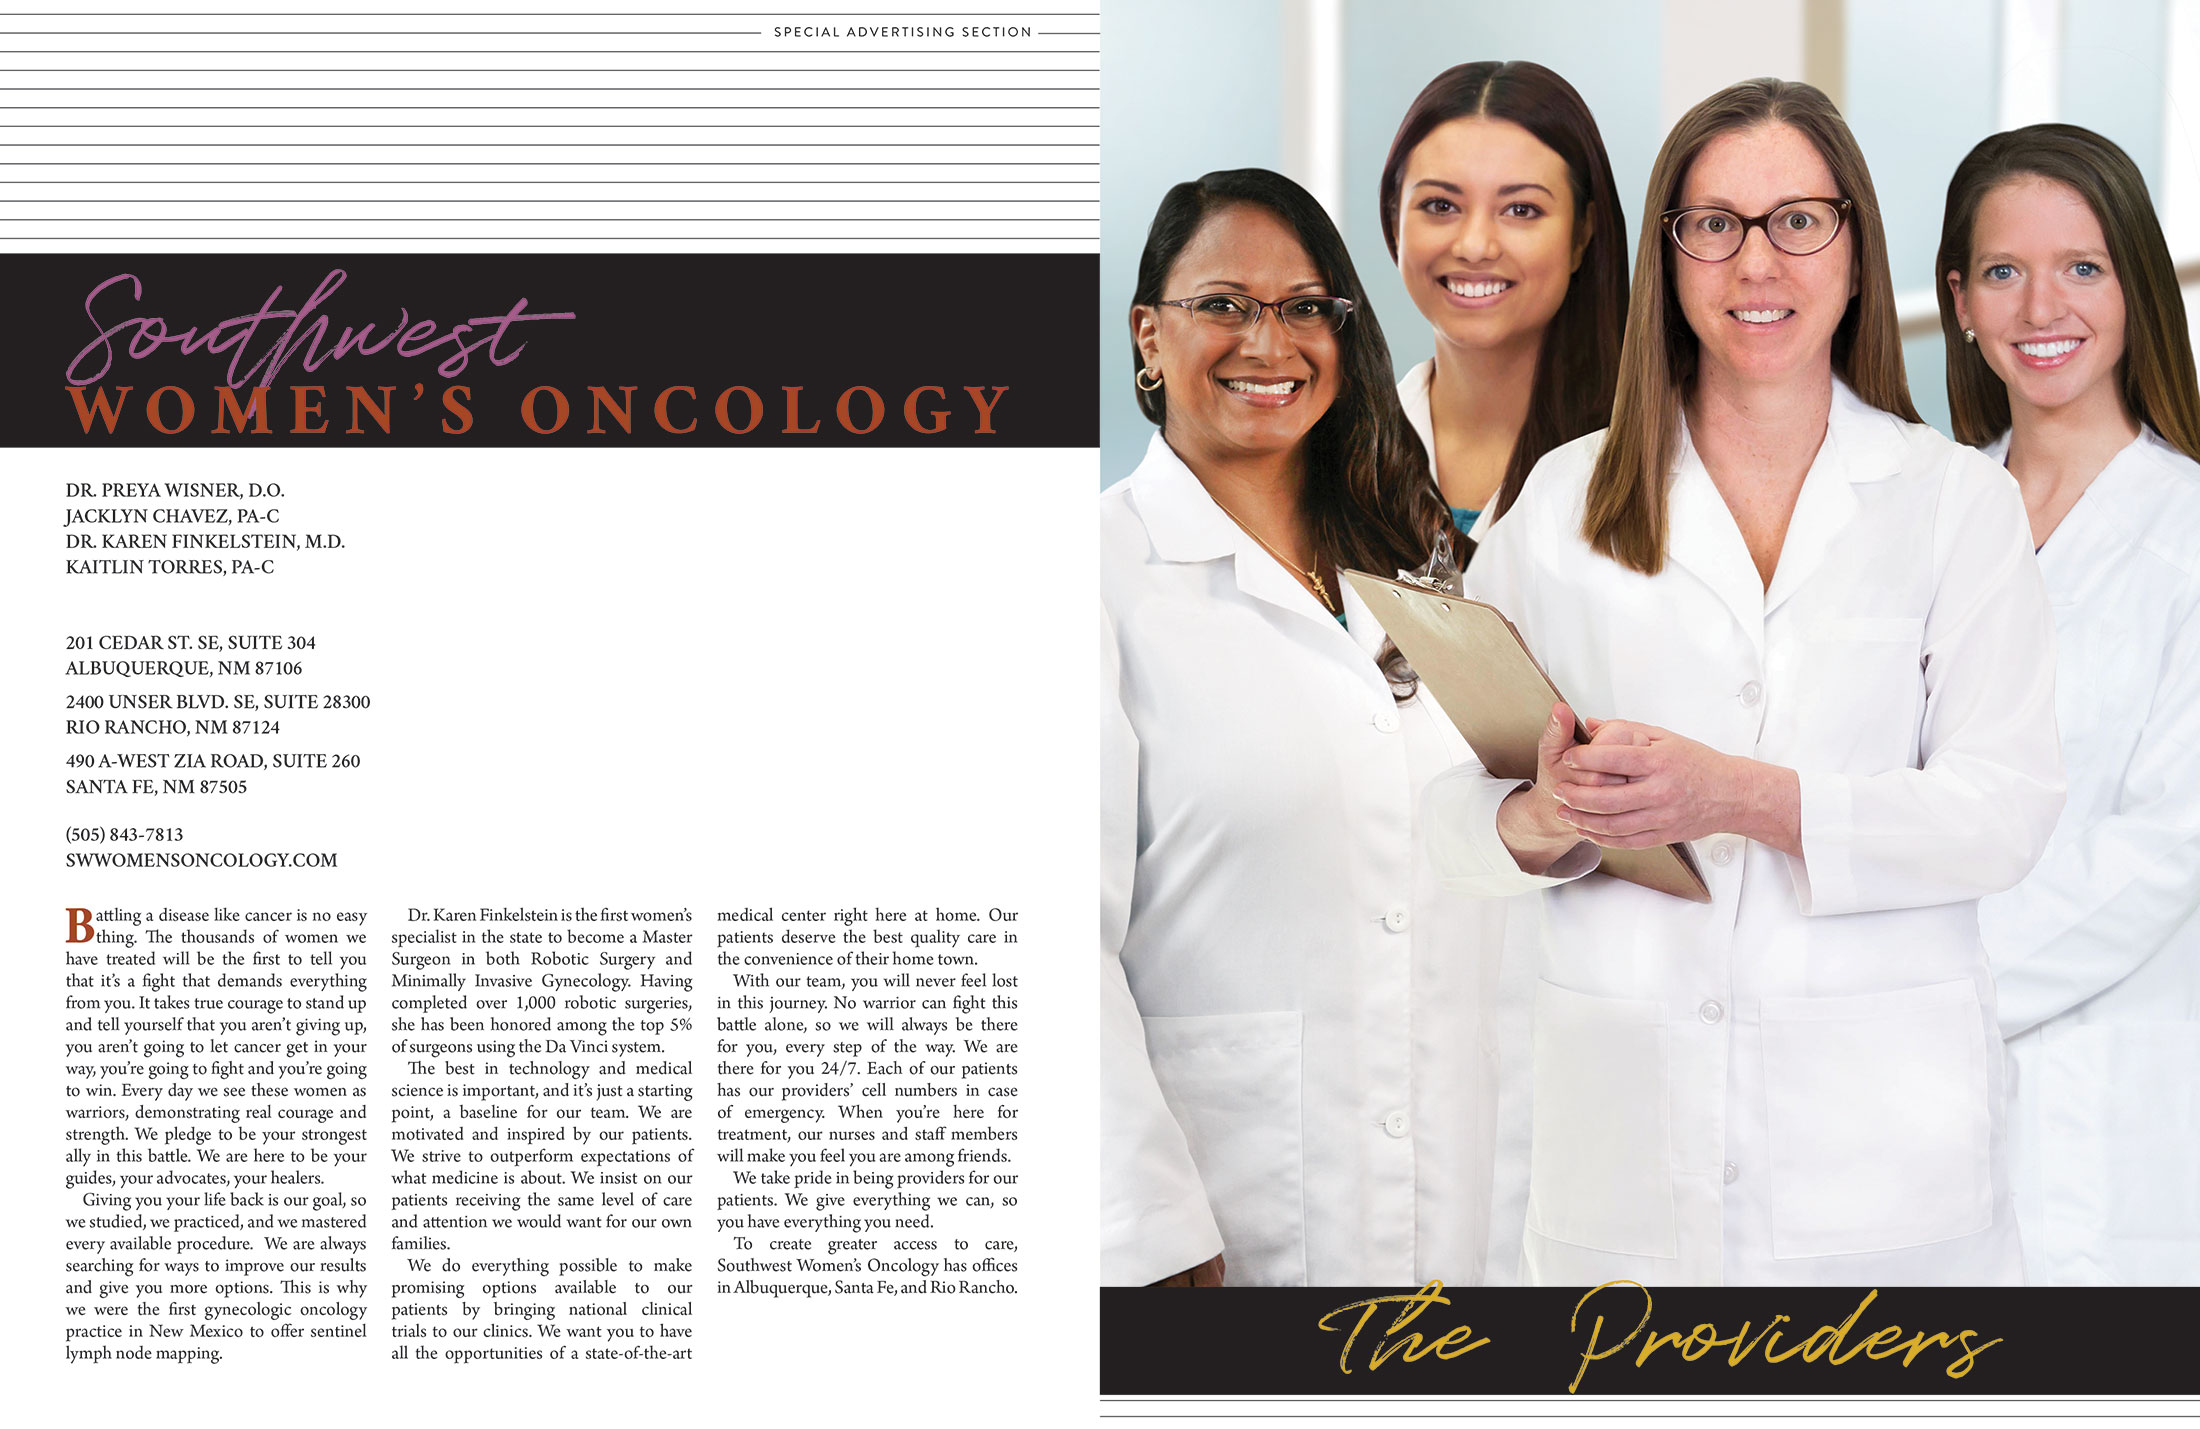 southwest womens oncology provides expert treatment and compassionate care